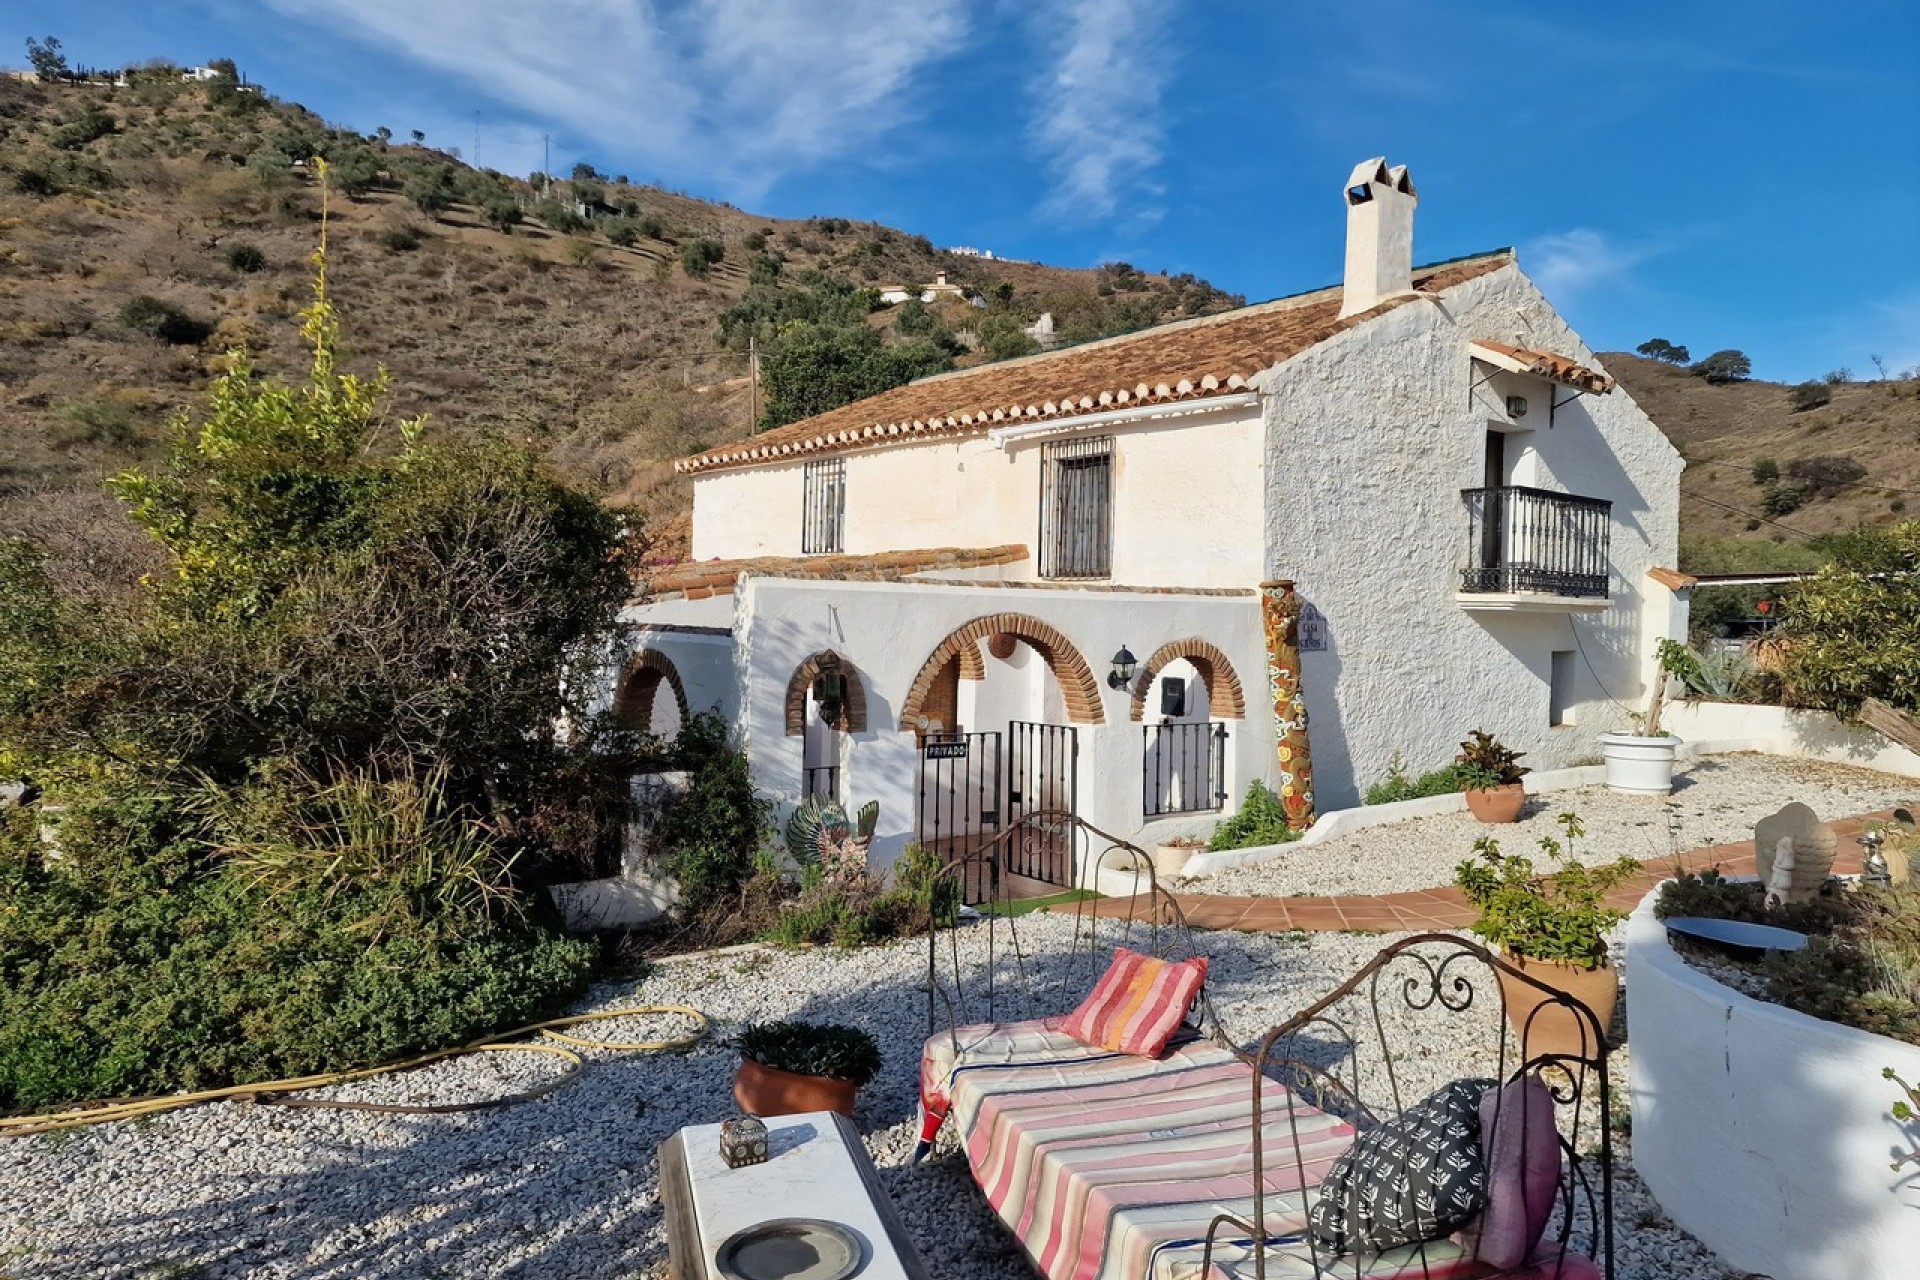 Revente - Town house -
Comares - Inland